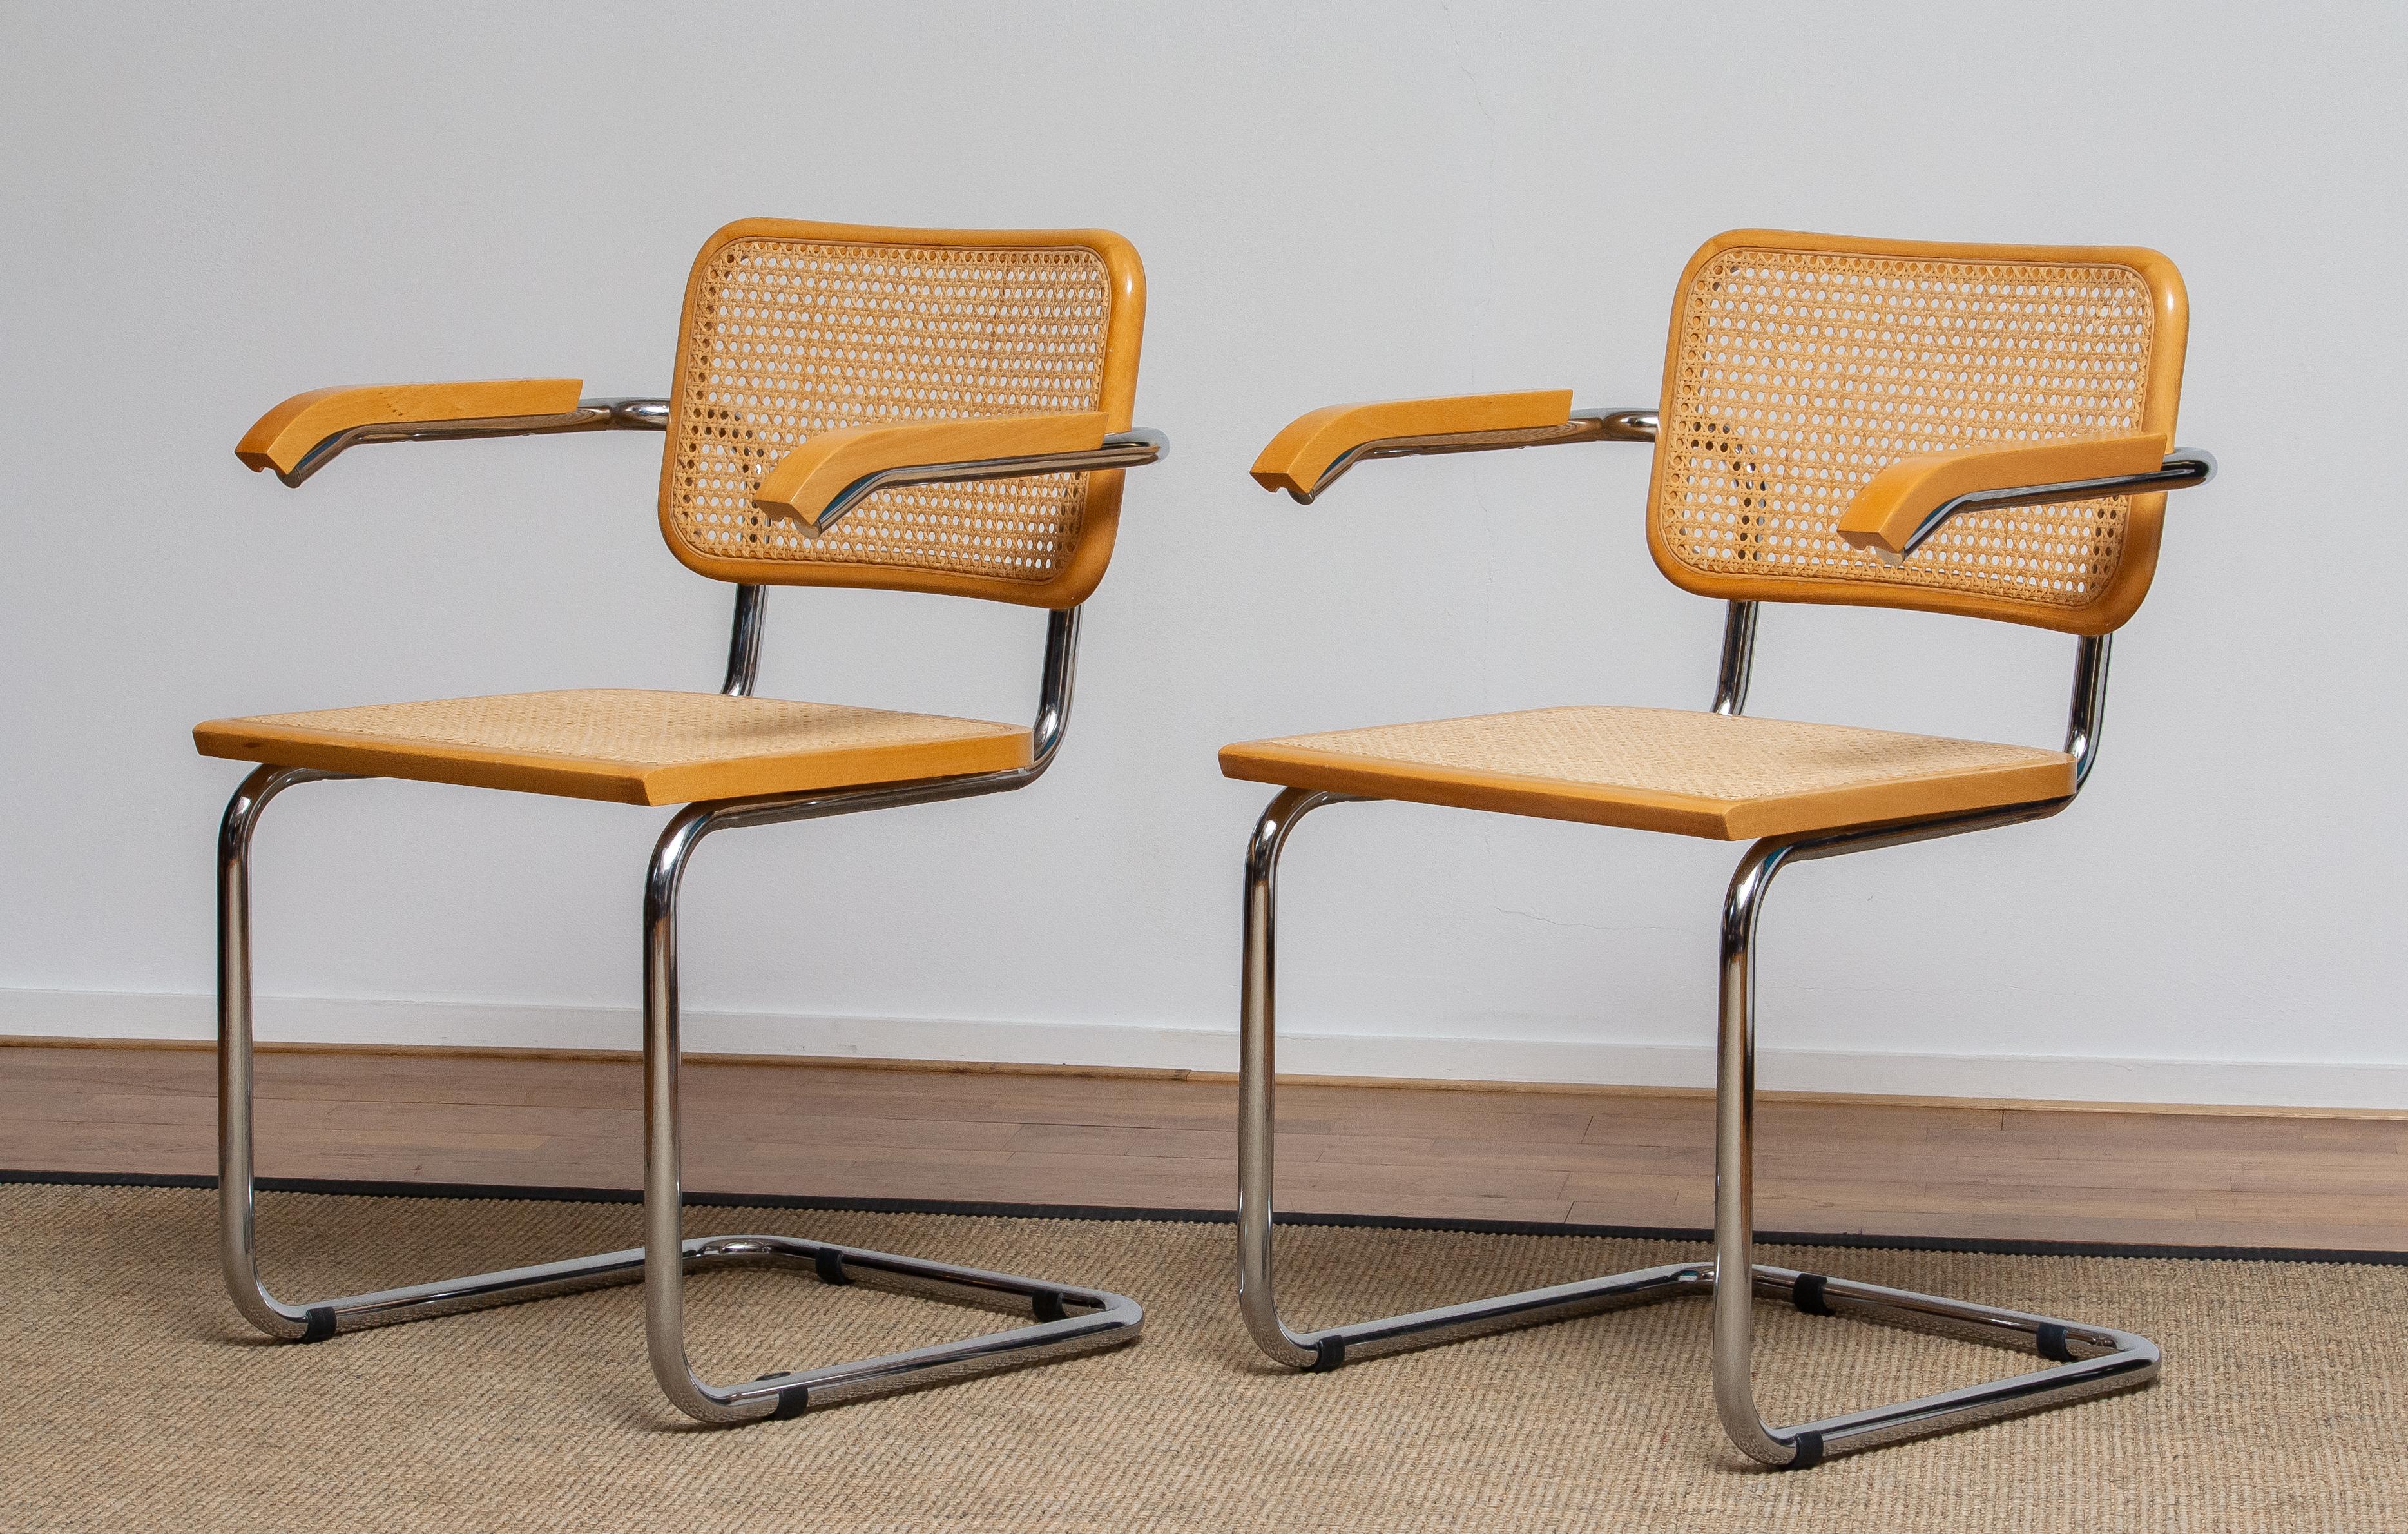 Pair of Marcel Breuer Cane or Chrome and Gold Beech Cesca S64 Chairs, Italy In Good Condition In Silvolde, Gelderland